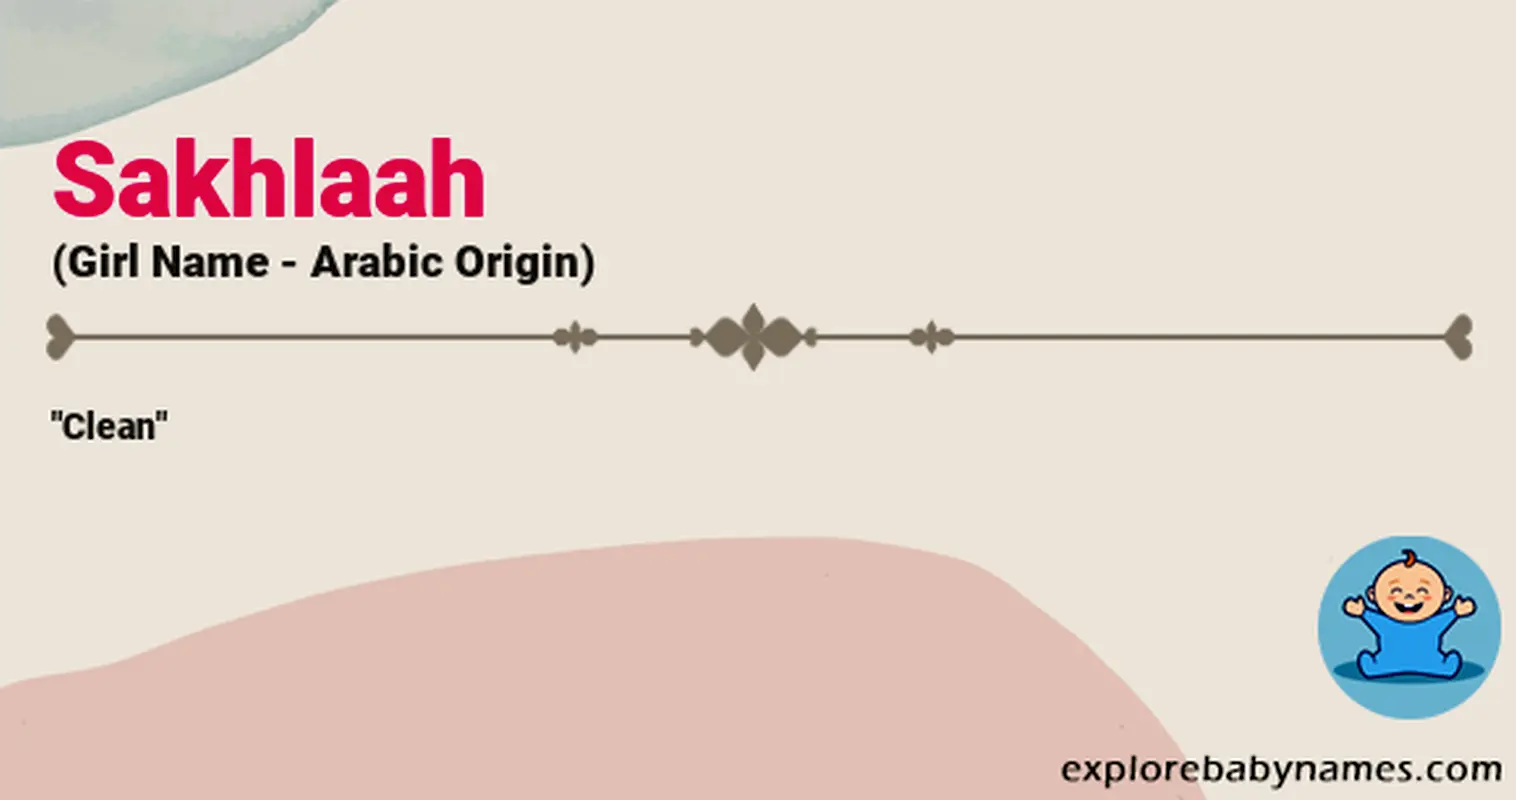 Meaning of Sakhlaah